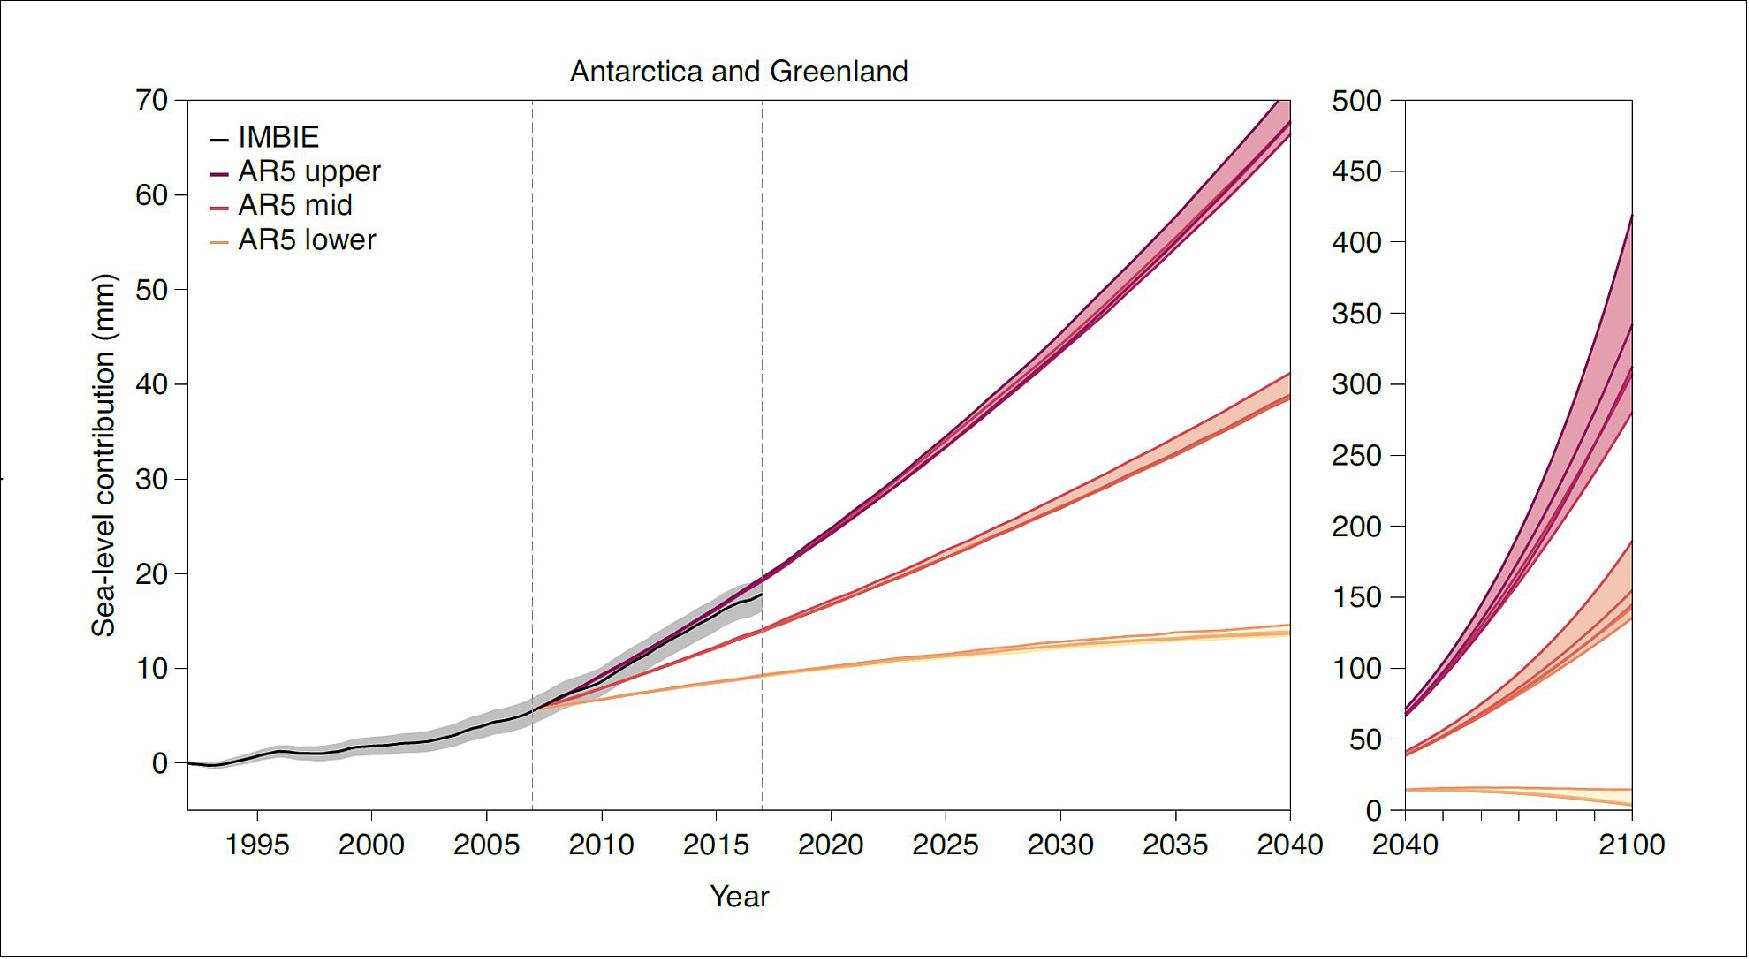 Figure 72: The Antarctic and Greenland ice sheet contribution to global sea level according to IMBIE (black), compared to satellite observations and projections between 1992-2040 (left) and 2040-2100 (right), image credit: IMBIE